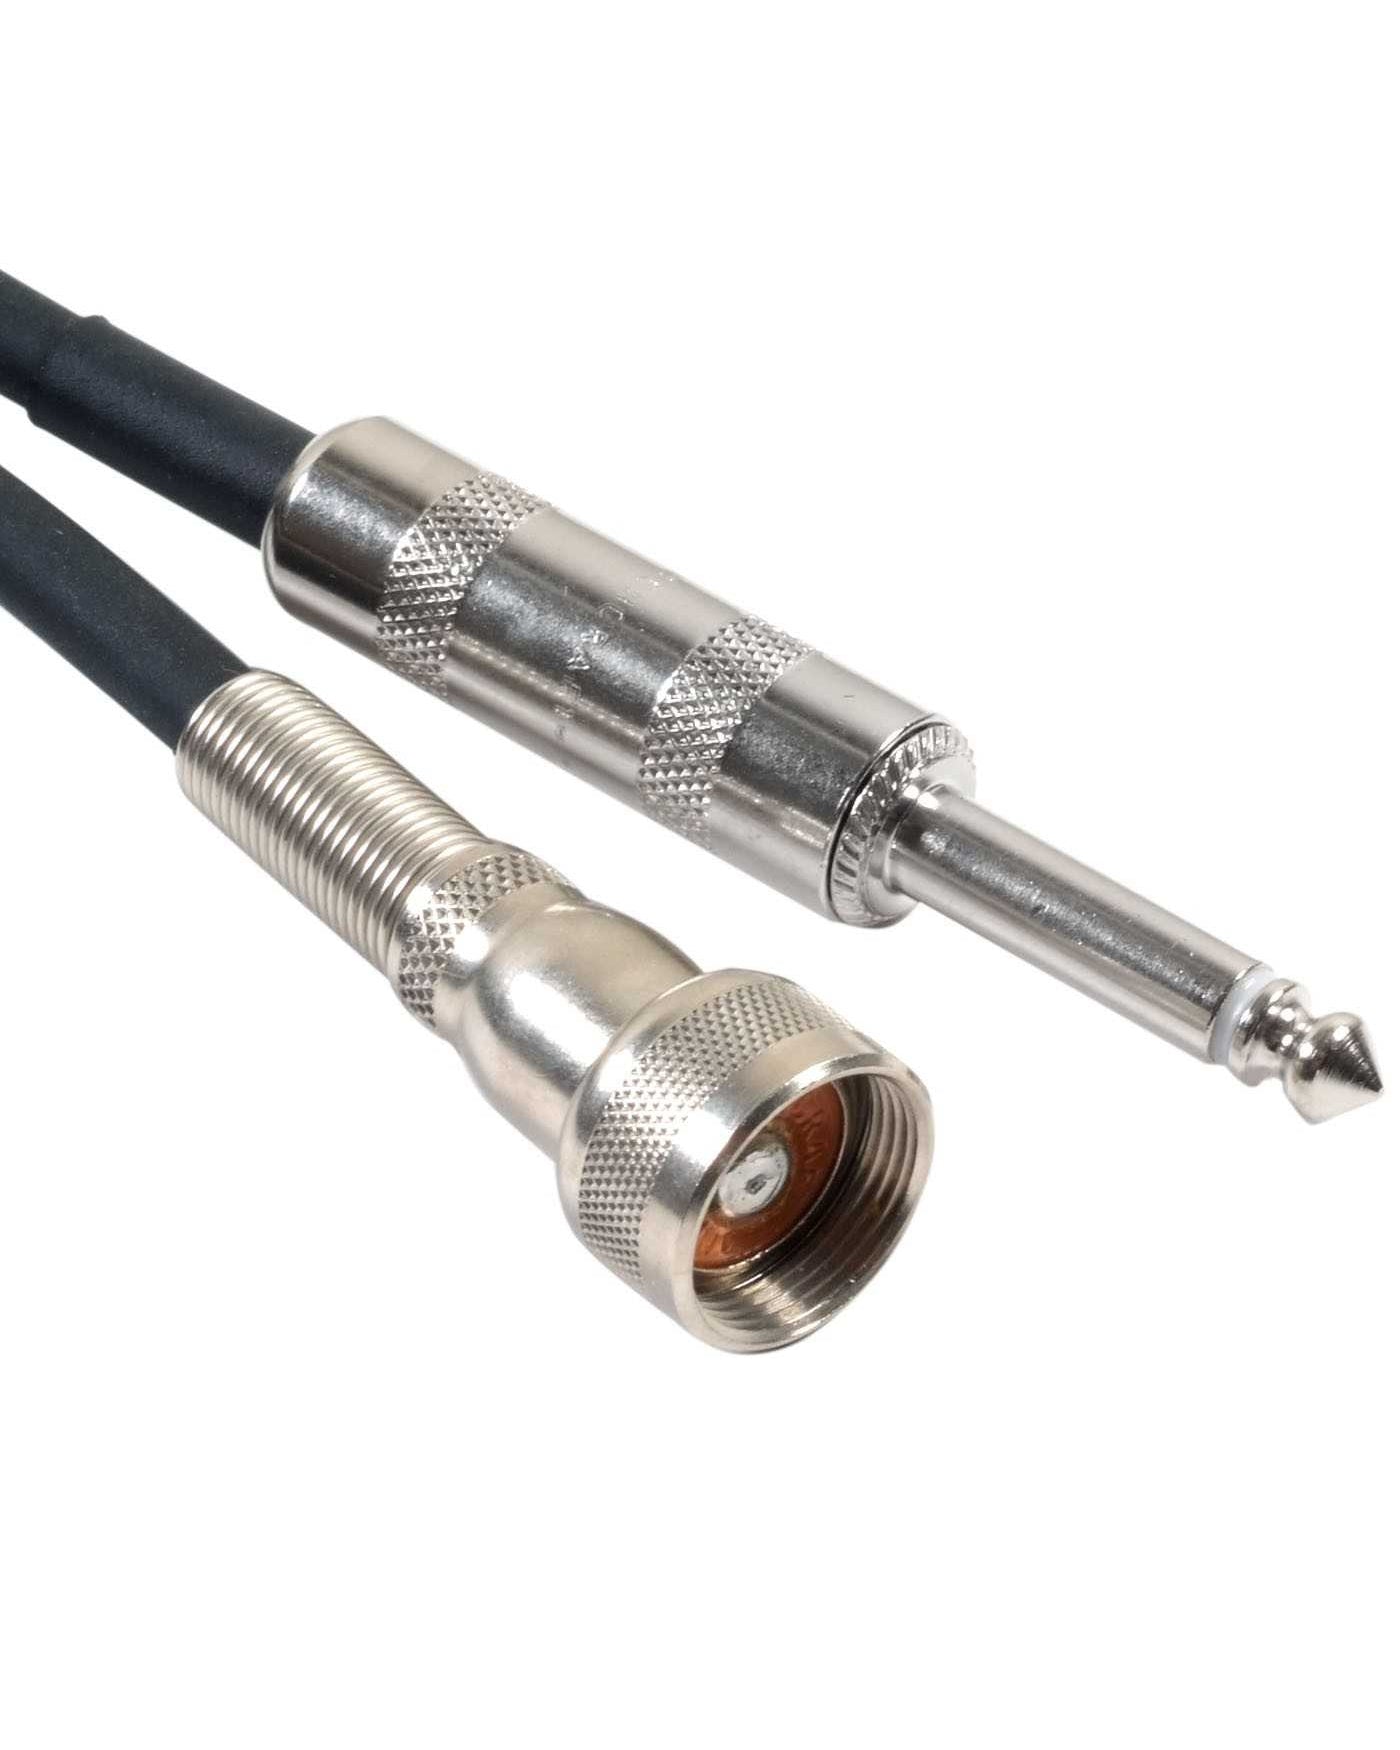 Image 1 of Quantum Audio Designs 1/4" Male to Screw-On Style Cable, 15' - SKU# QHMF-15 : Product Type Cables & Accessories : Elderly Instruments